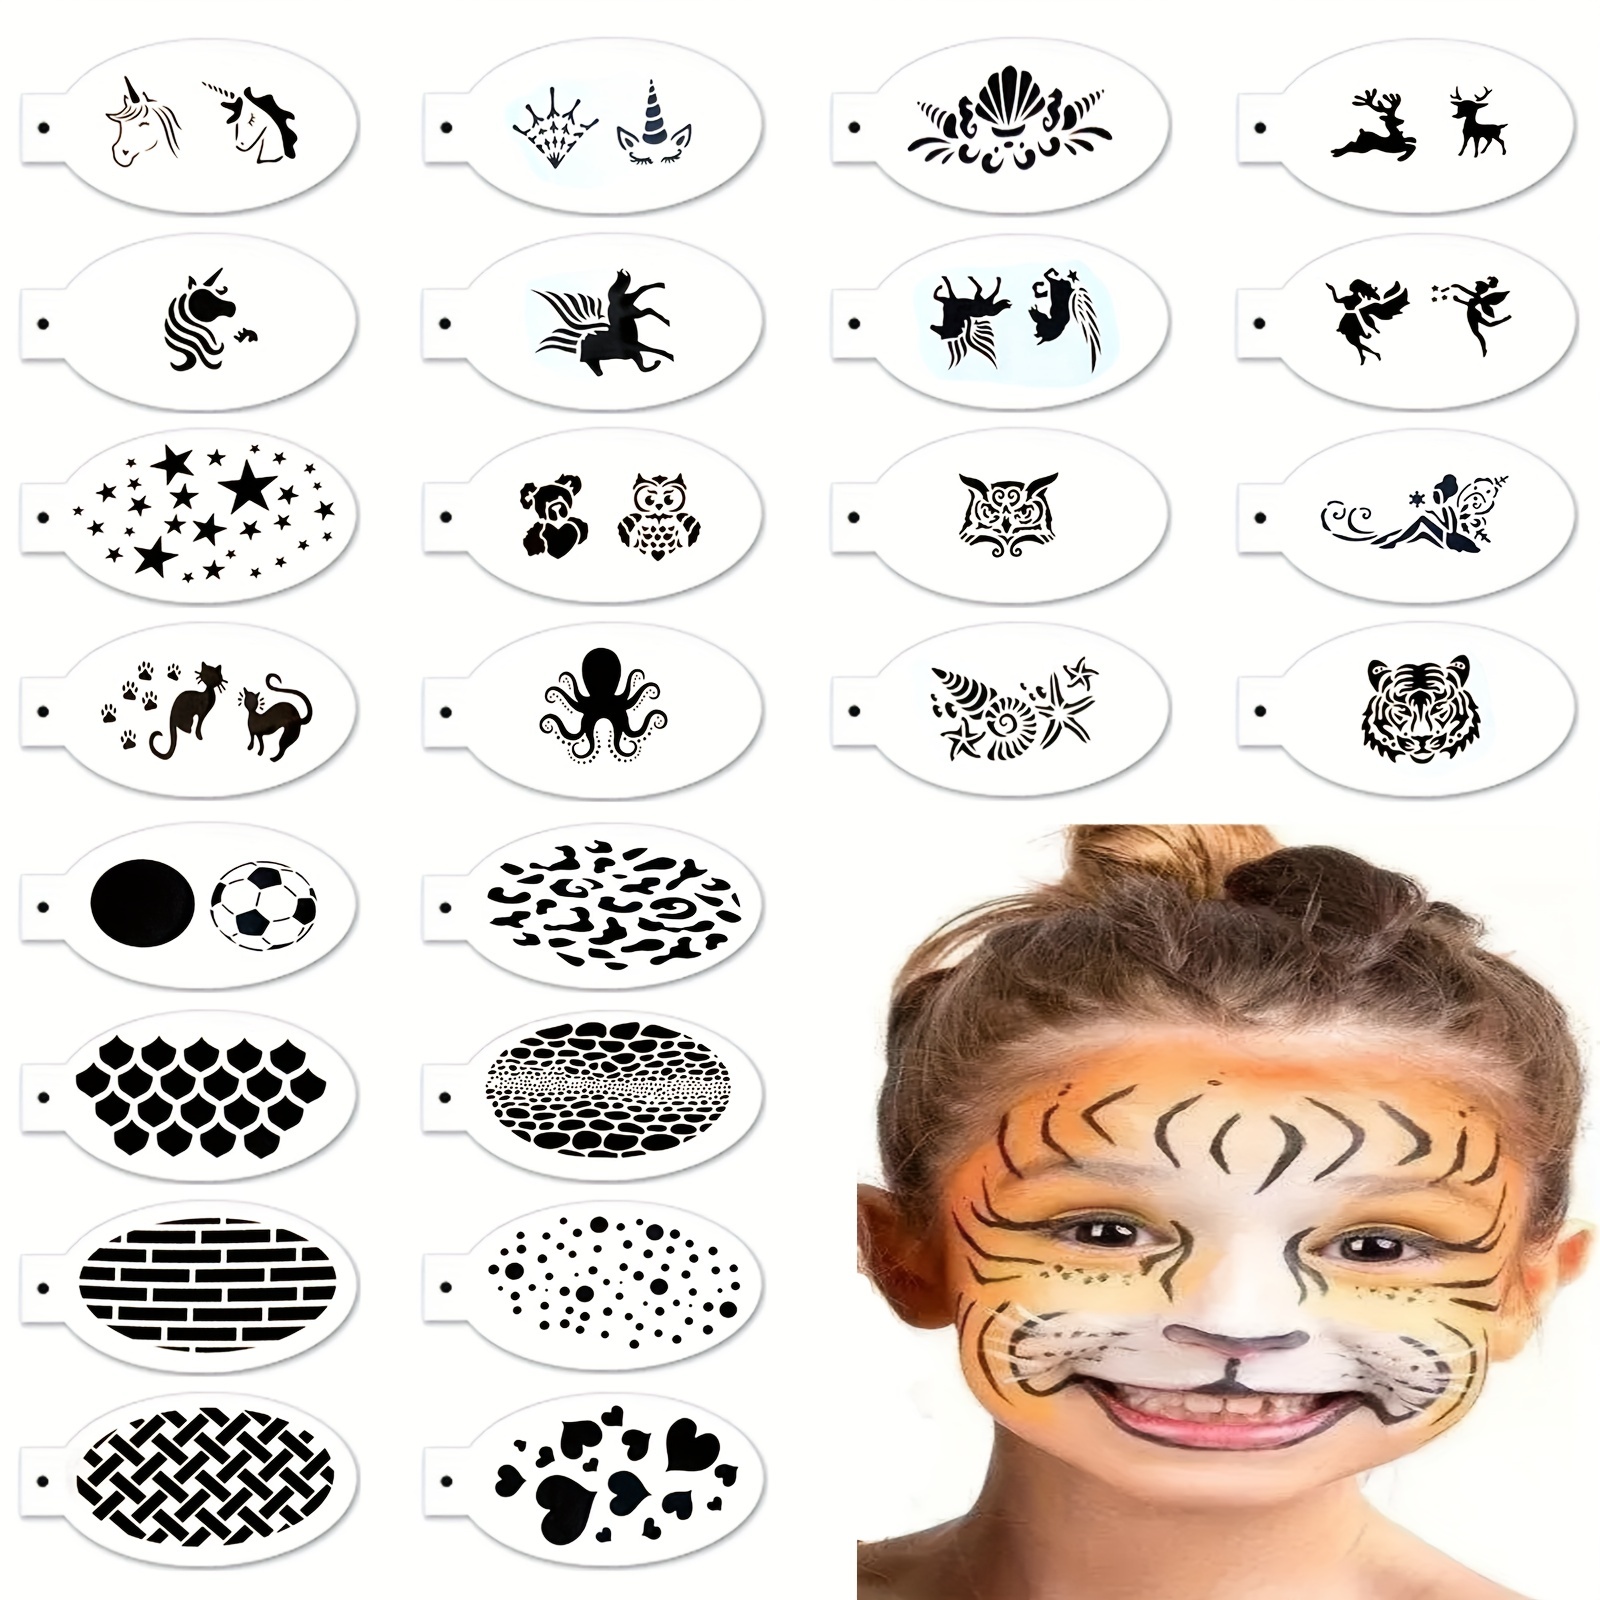  52 Pcs Face Paint Stencils Kit, 32 Large Face Paint Stencils 10  Temporary Body Painting Stencils and 10 Painting Brushes Halloween Mask  Stencil for Kids Party Art Painting (Animal Style)